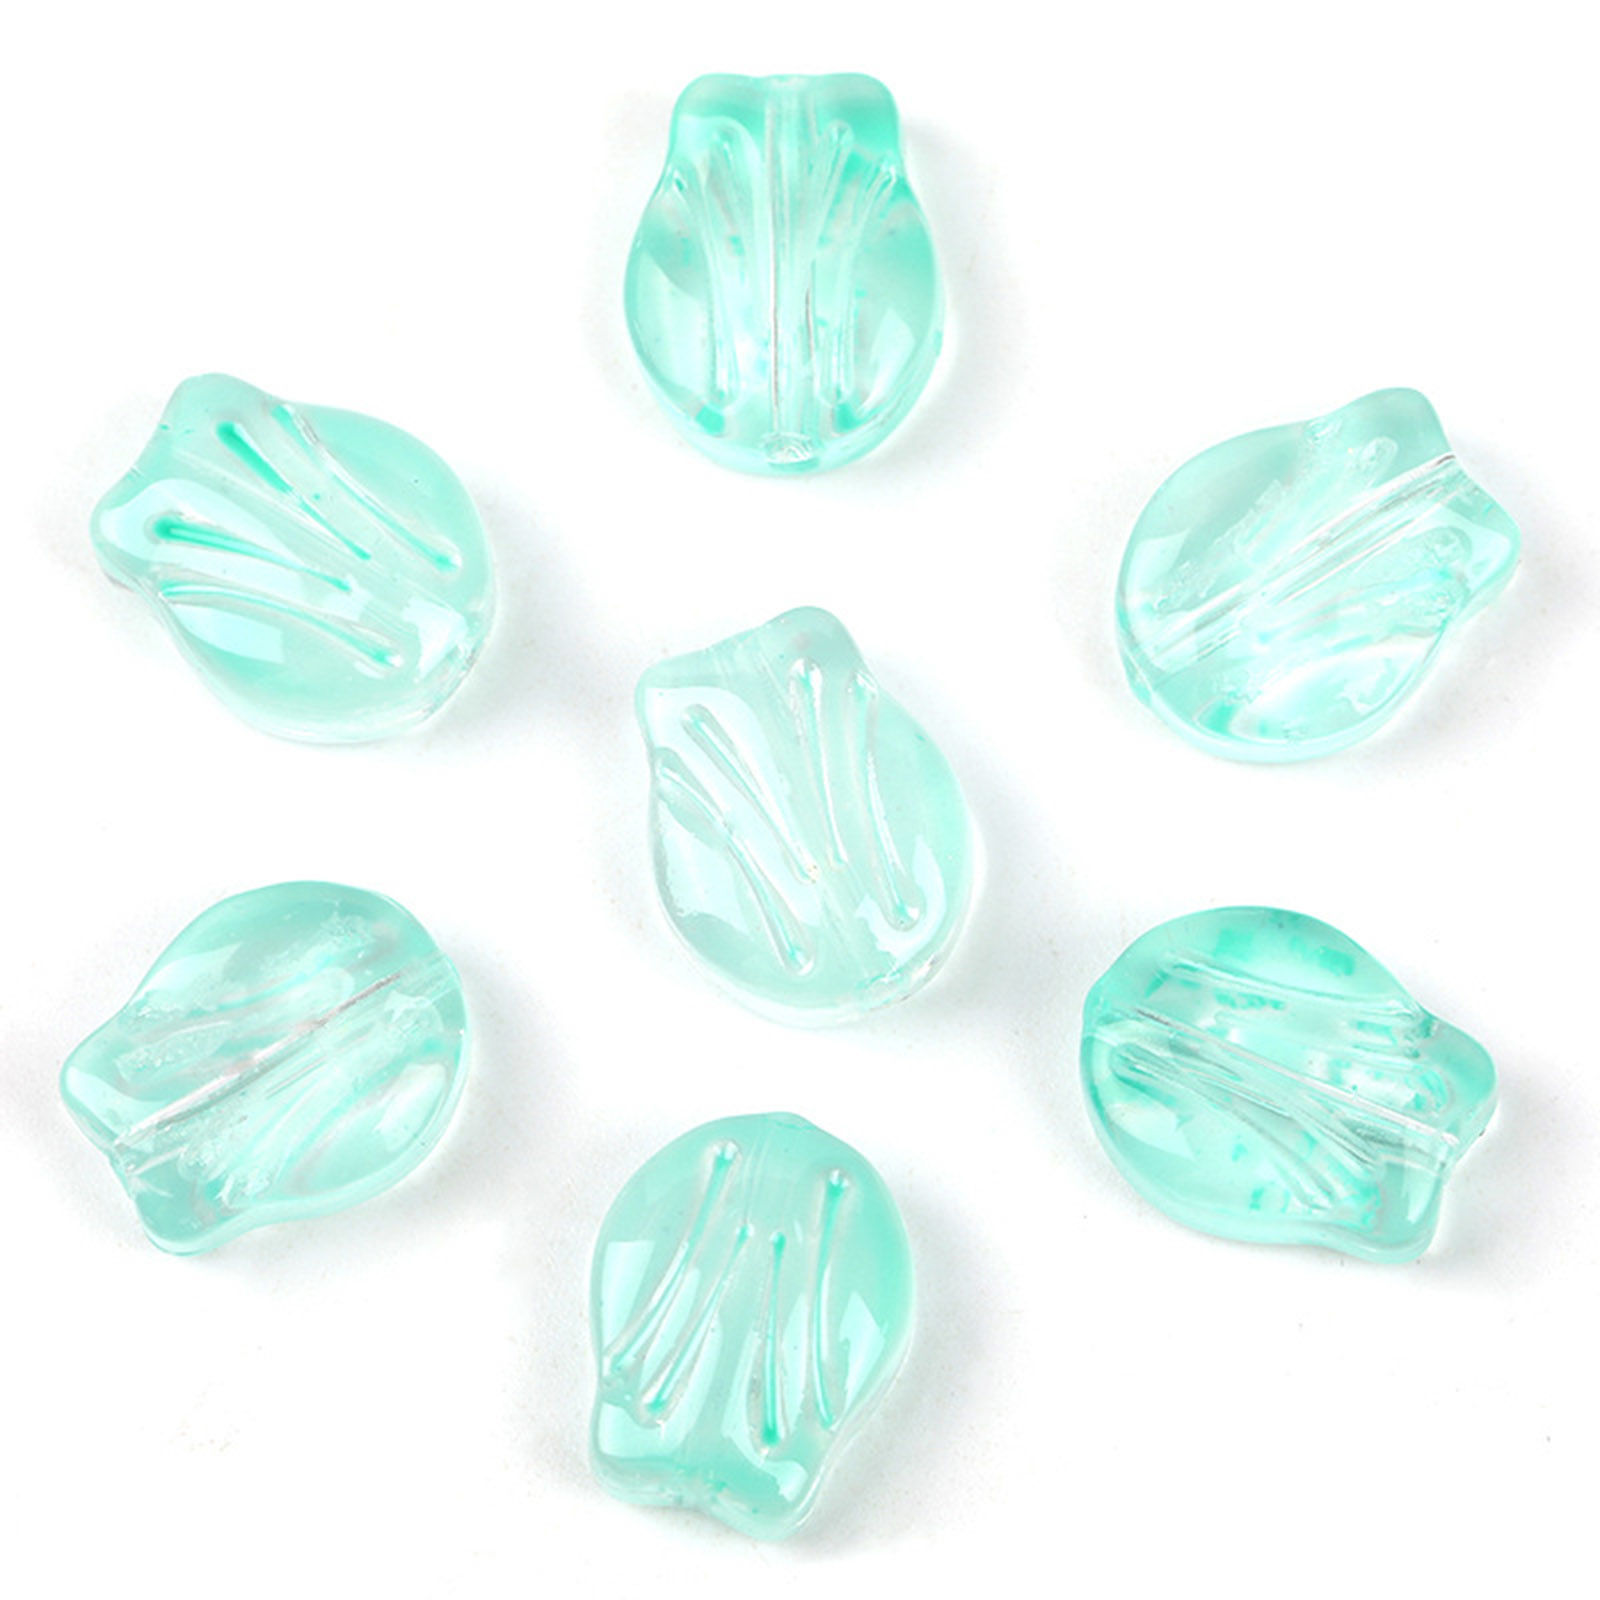 Picture of Lampwork Glass Beads Tulip Flower Lake Blue Gradient Color About 10.5mm x 8.4mm, Hole: Approx 0.8mm, 20 PCs